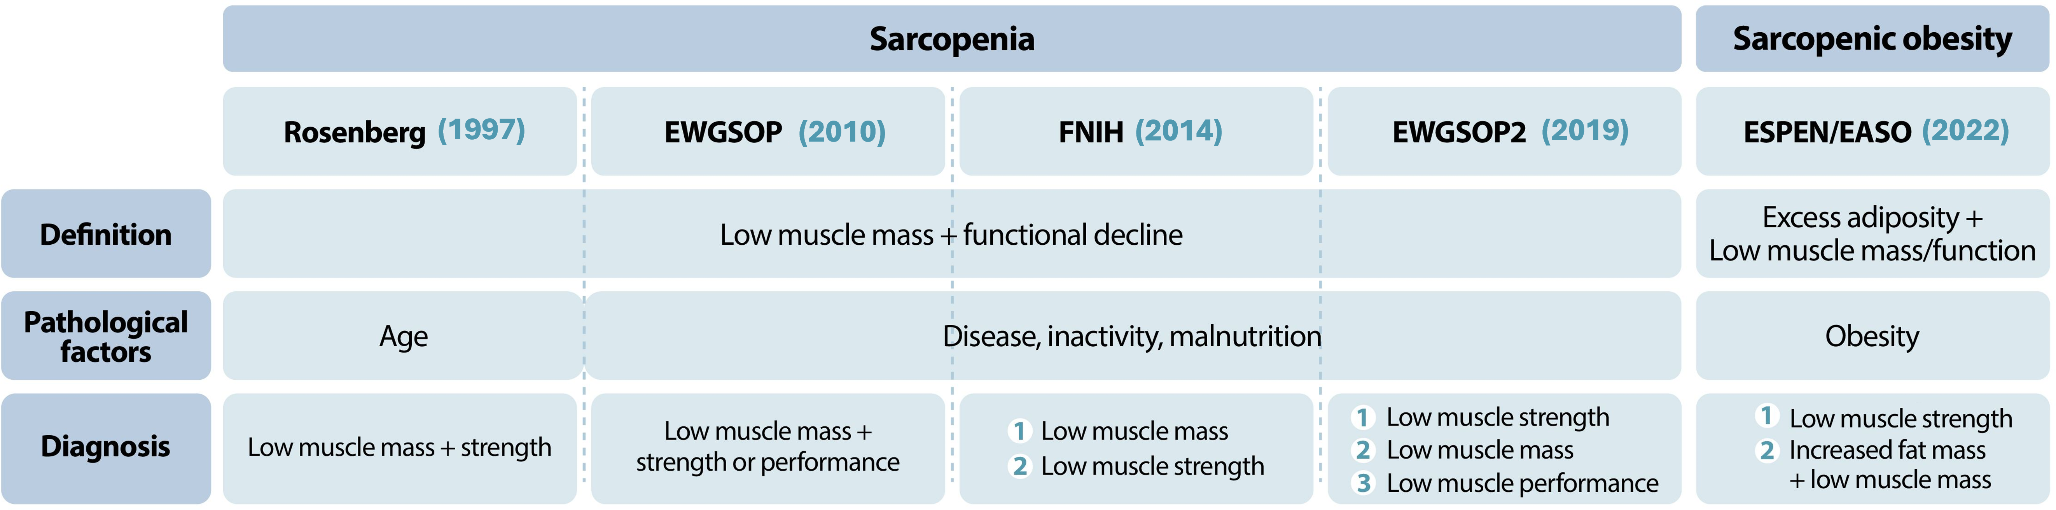 A multifaceted and inclusive methodology for the detection of sarcopenia in patients undergoing bariatric surgery: an in-depth analysis of current evidence